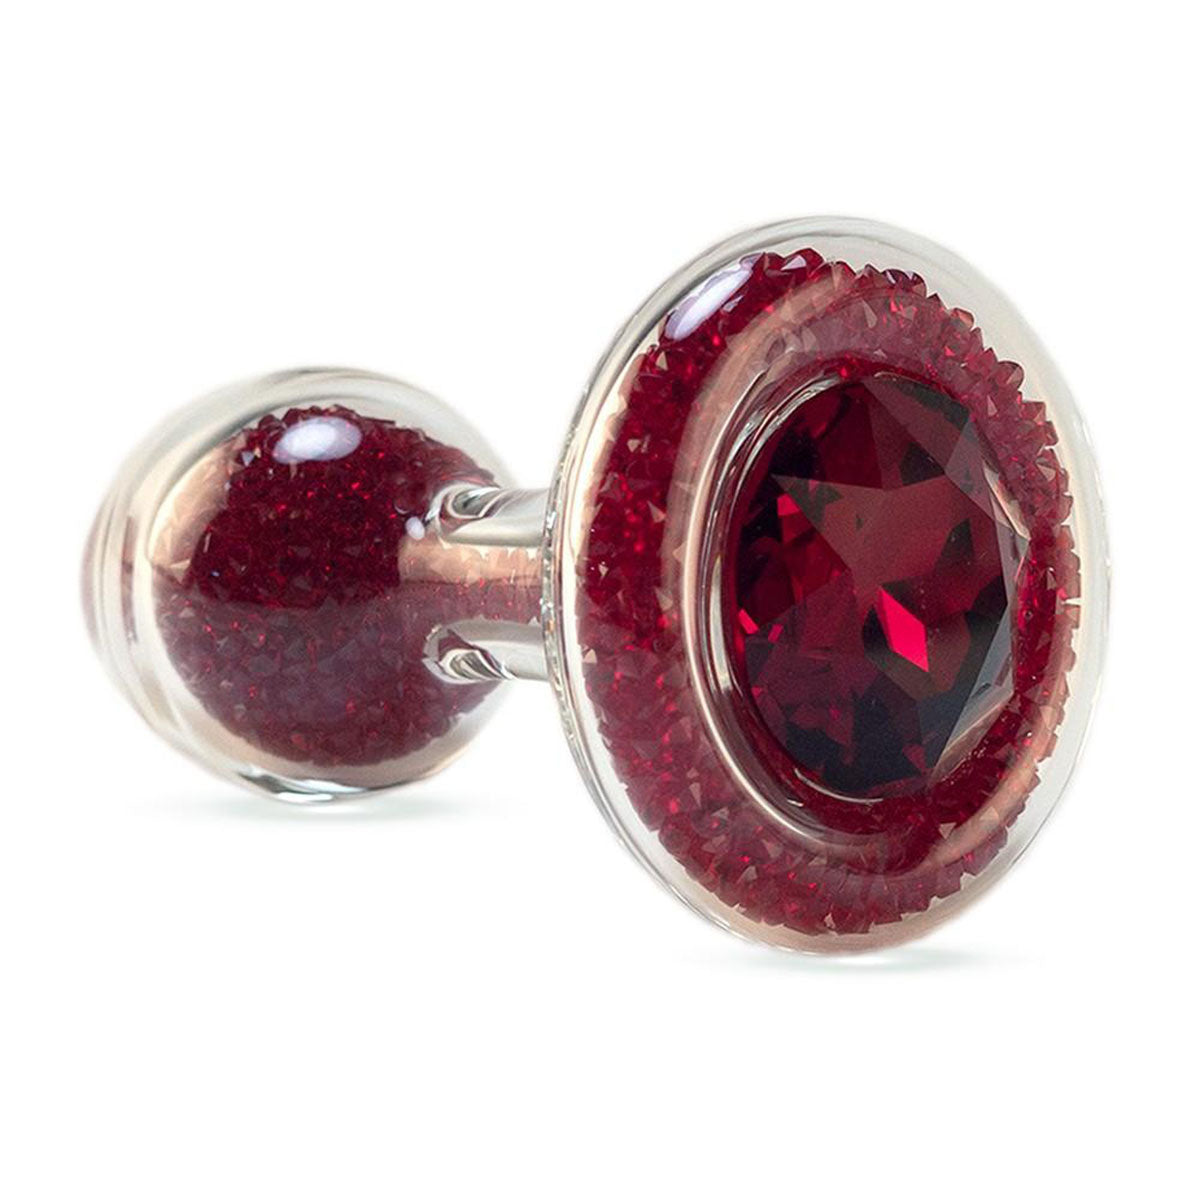 Sparkle Plug with Crystal Base Red Plugs